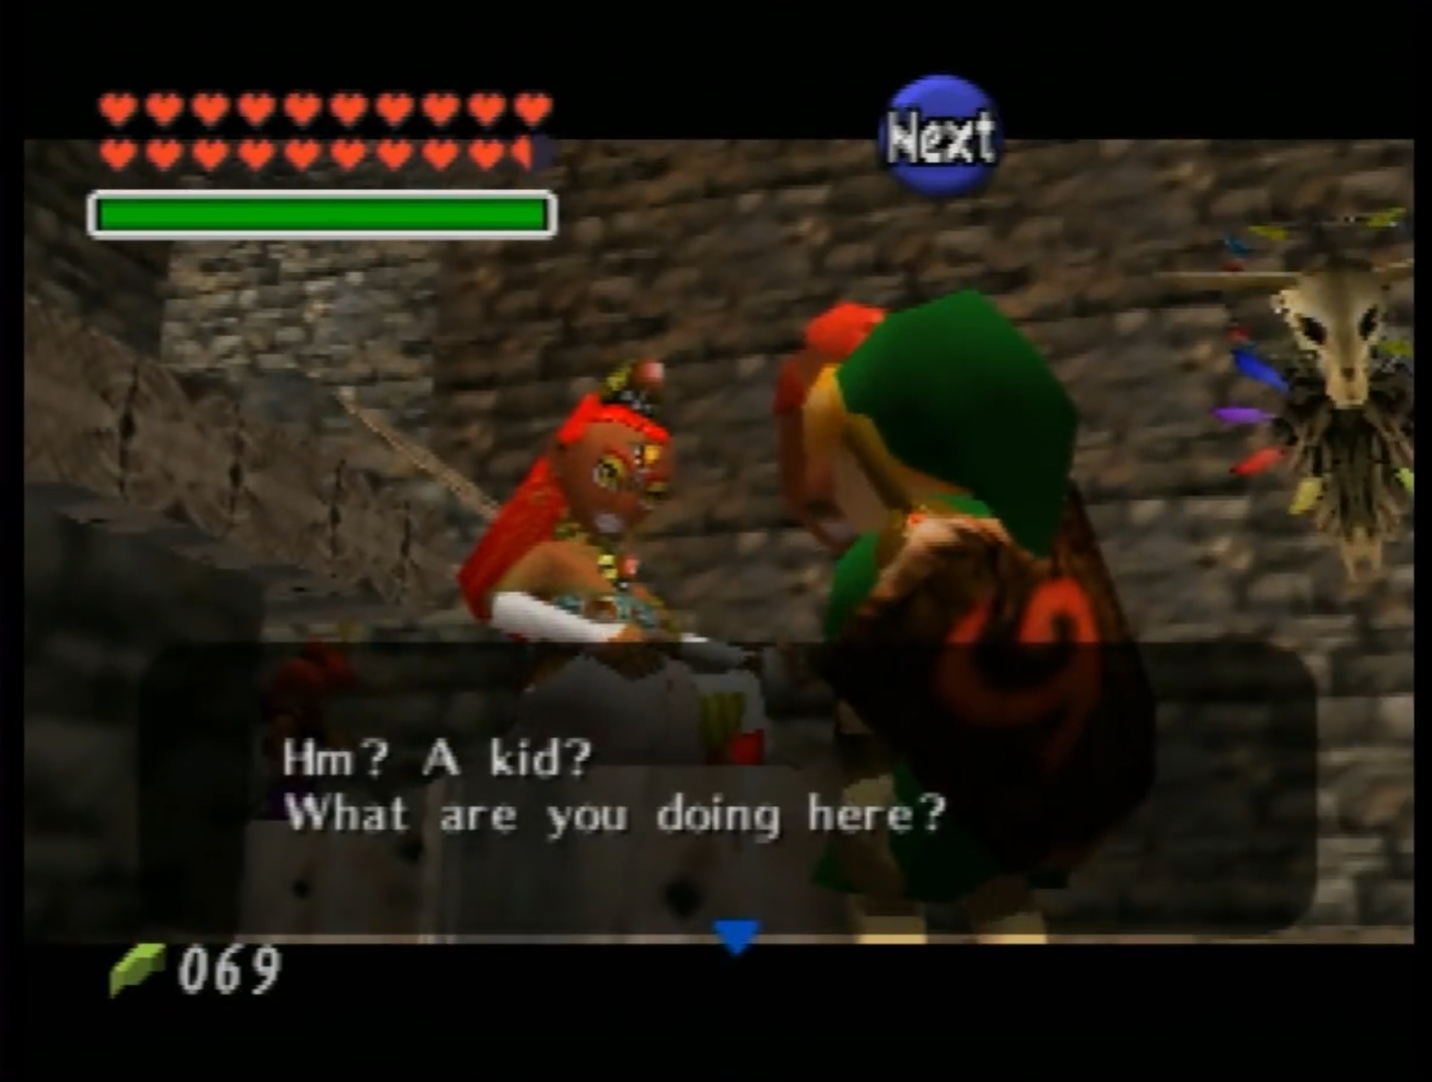 How Zelda fans changed the ending to Ocarina of Time on a vanilla